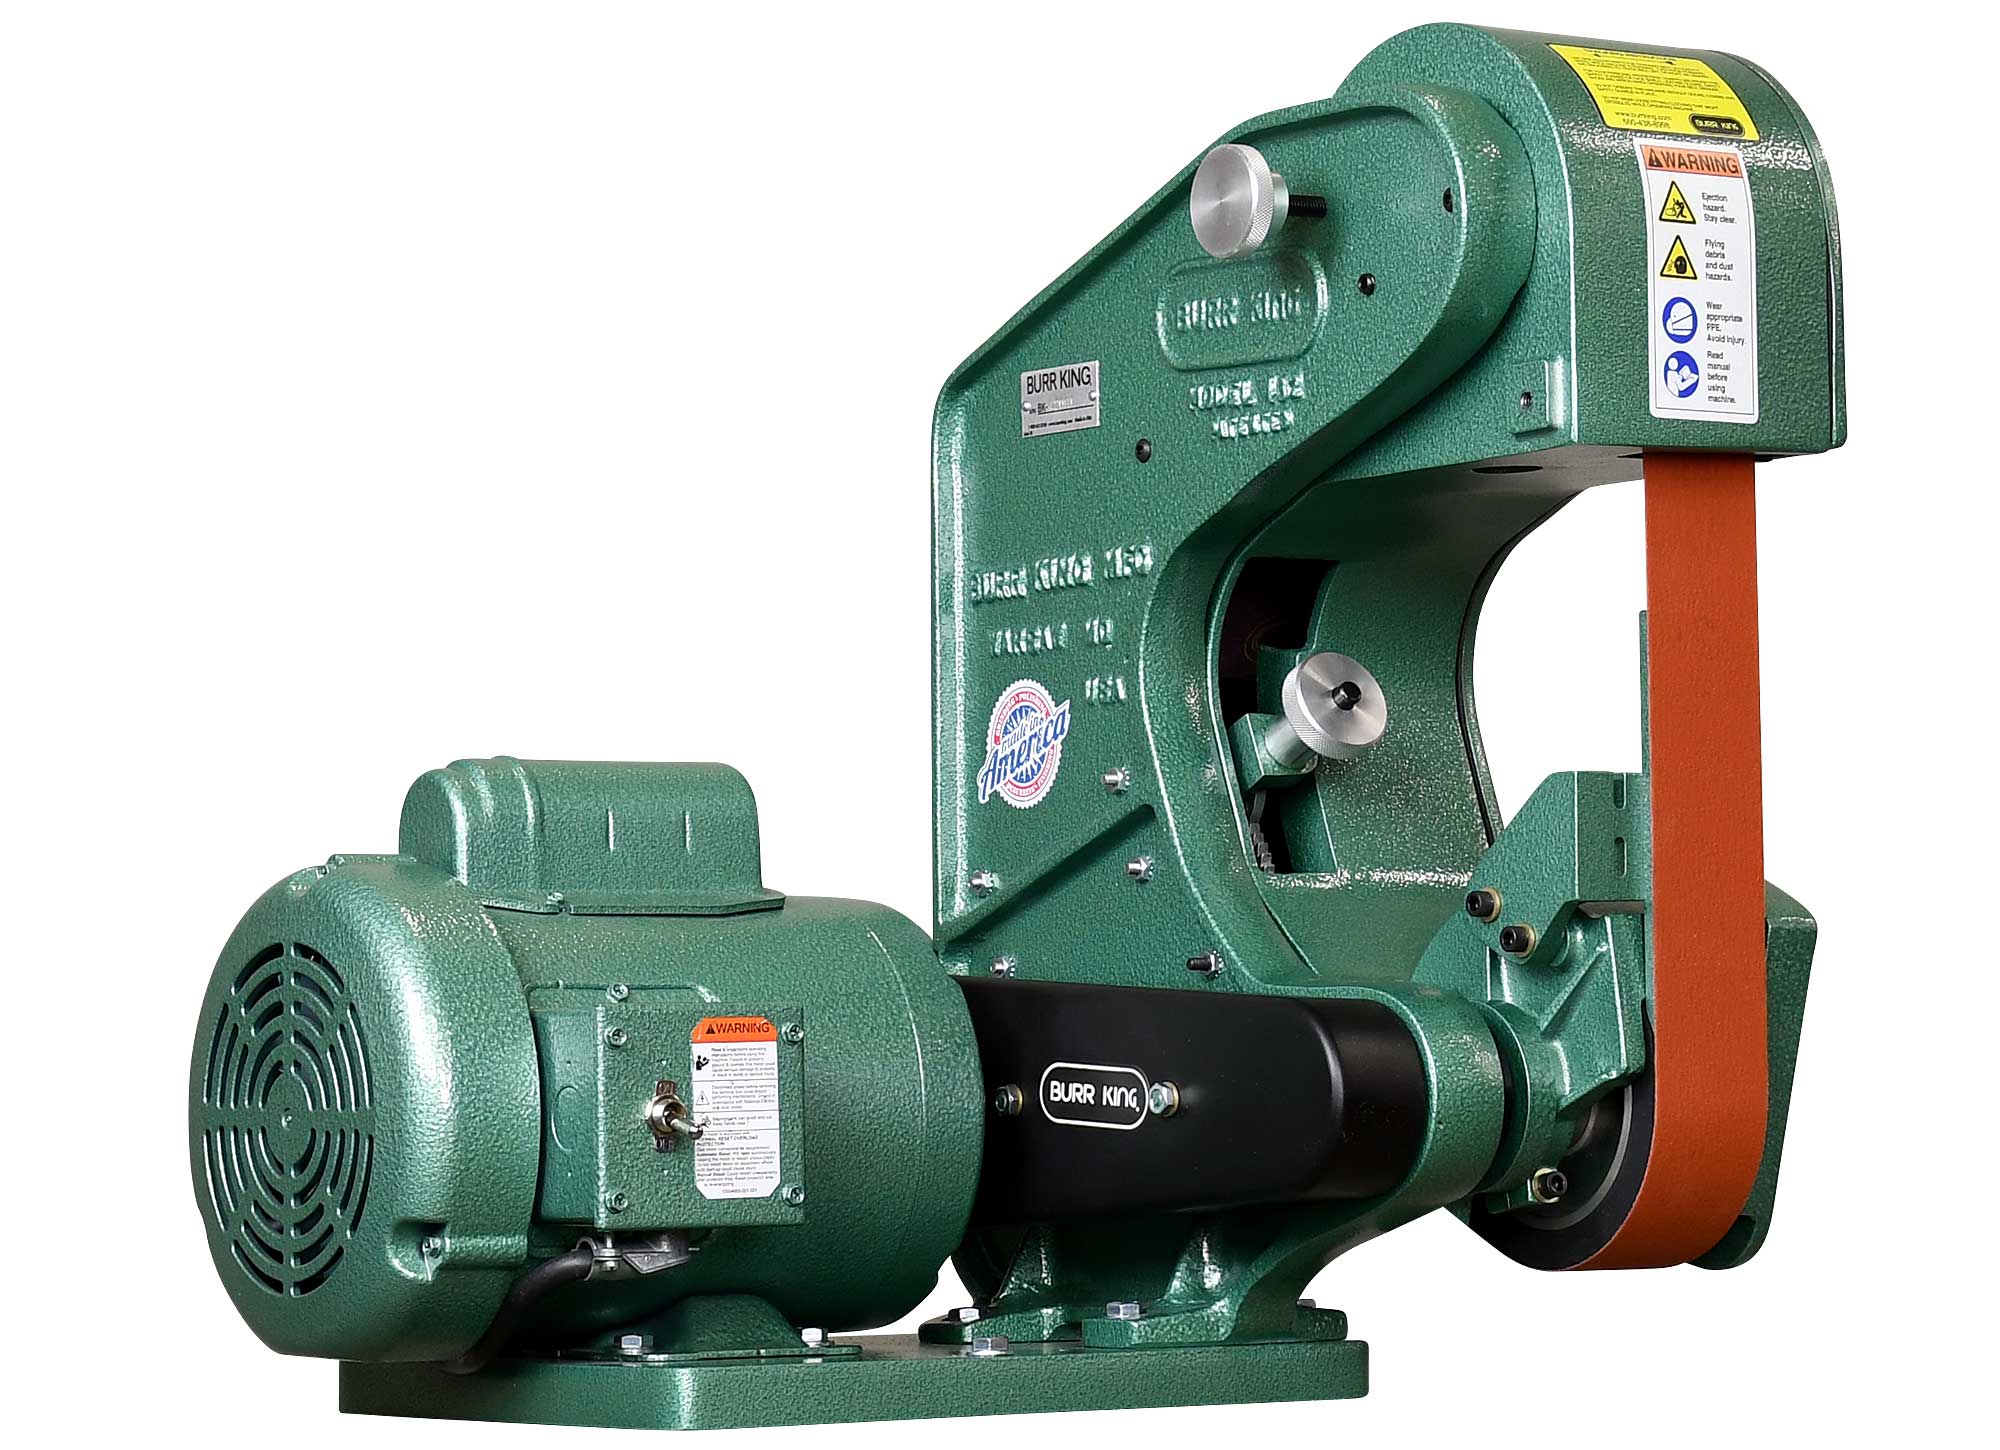 40100 Model 482 belt grinder shown without the included workrest.  Removing the workrest allows for easier access when grinding on the rubberized contact wheel. 